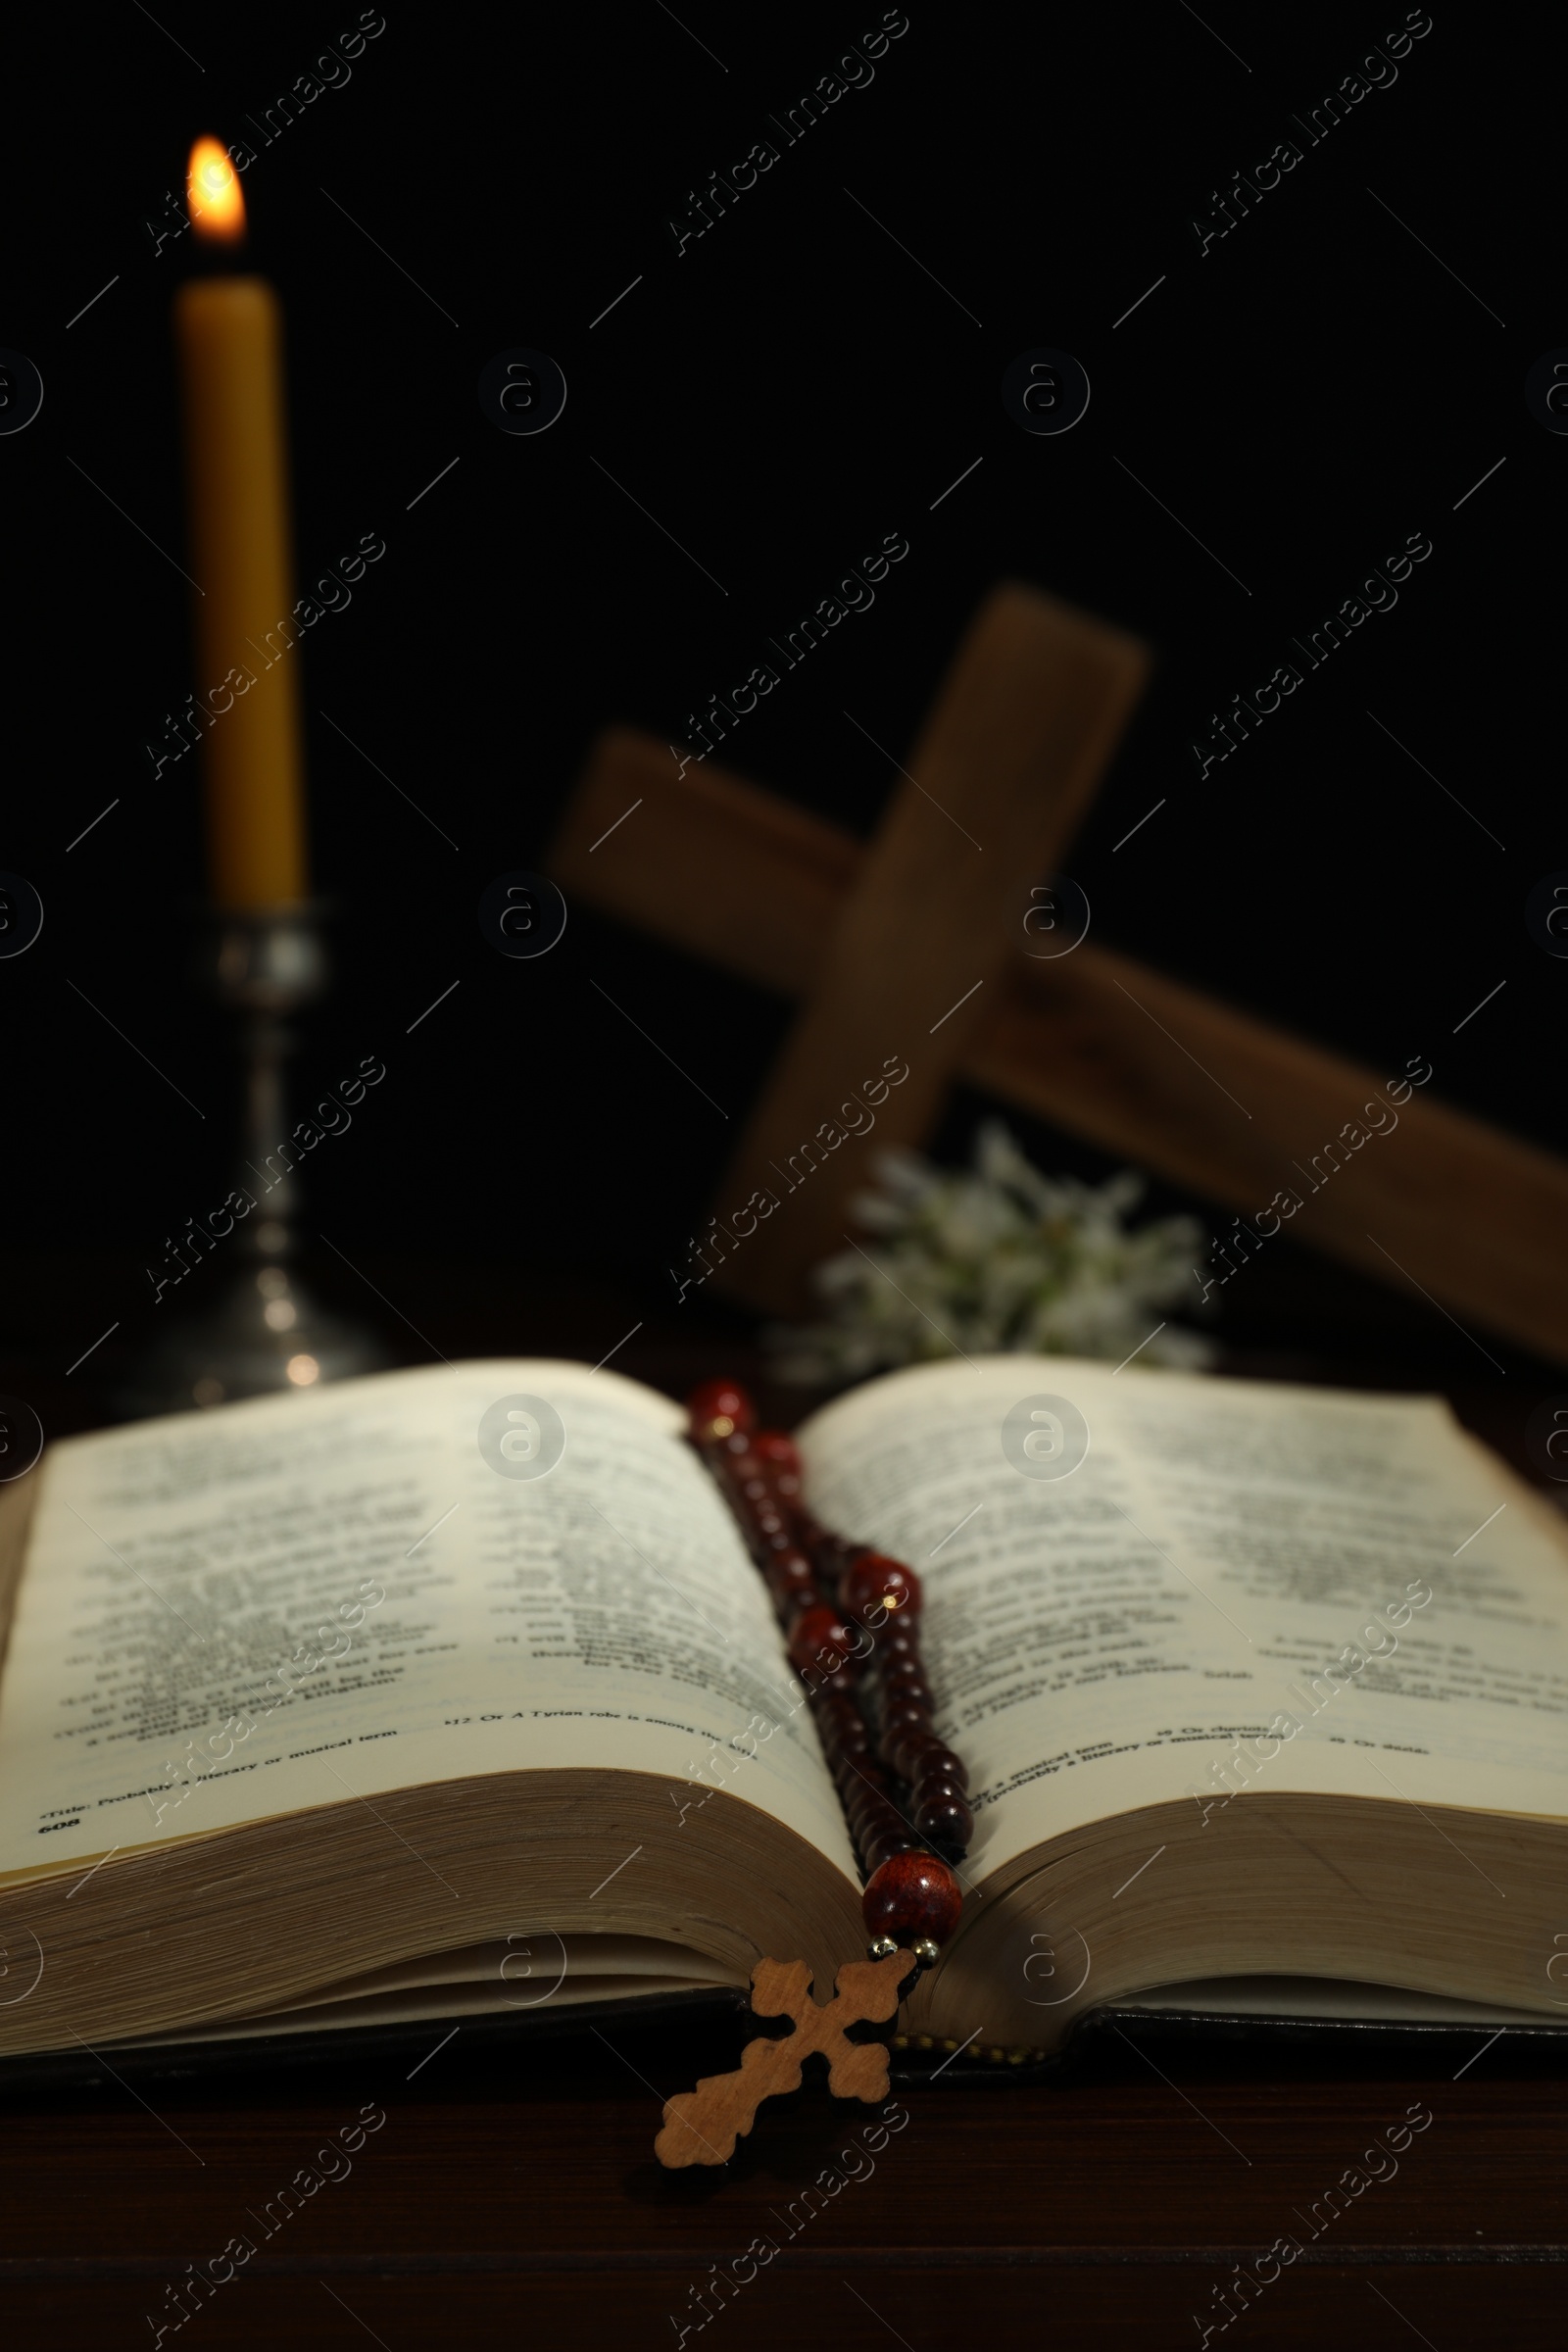 Photo of Crosses, rosary beads, Bible and church candle on wooden table